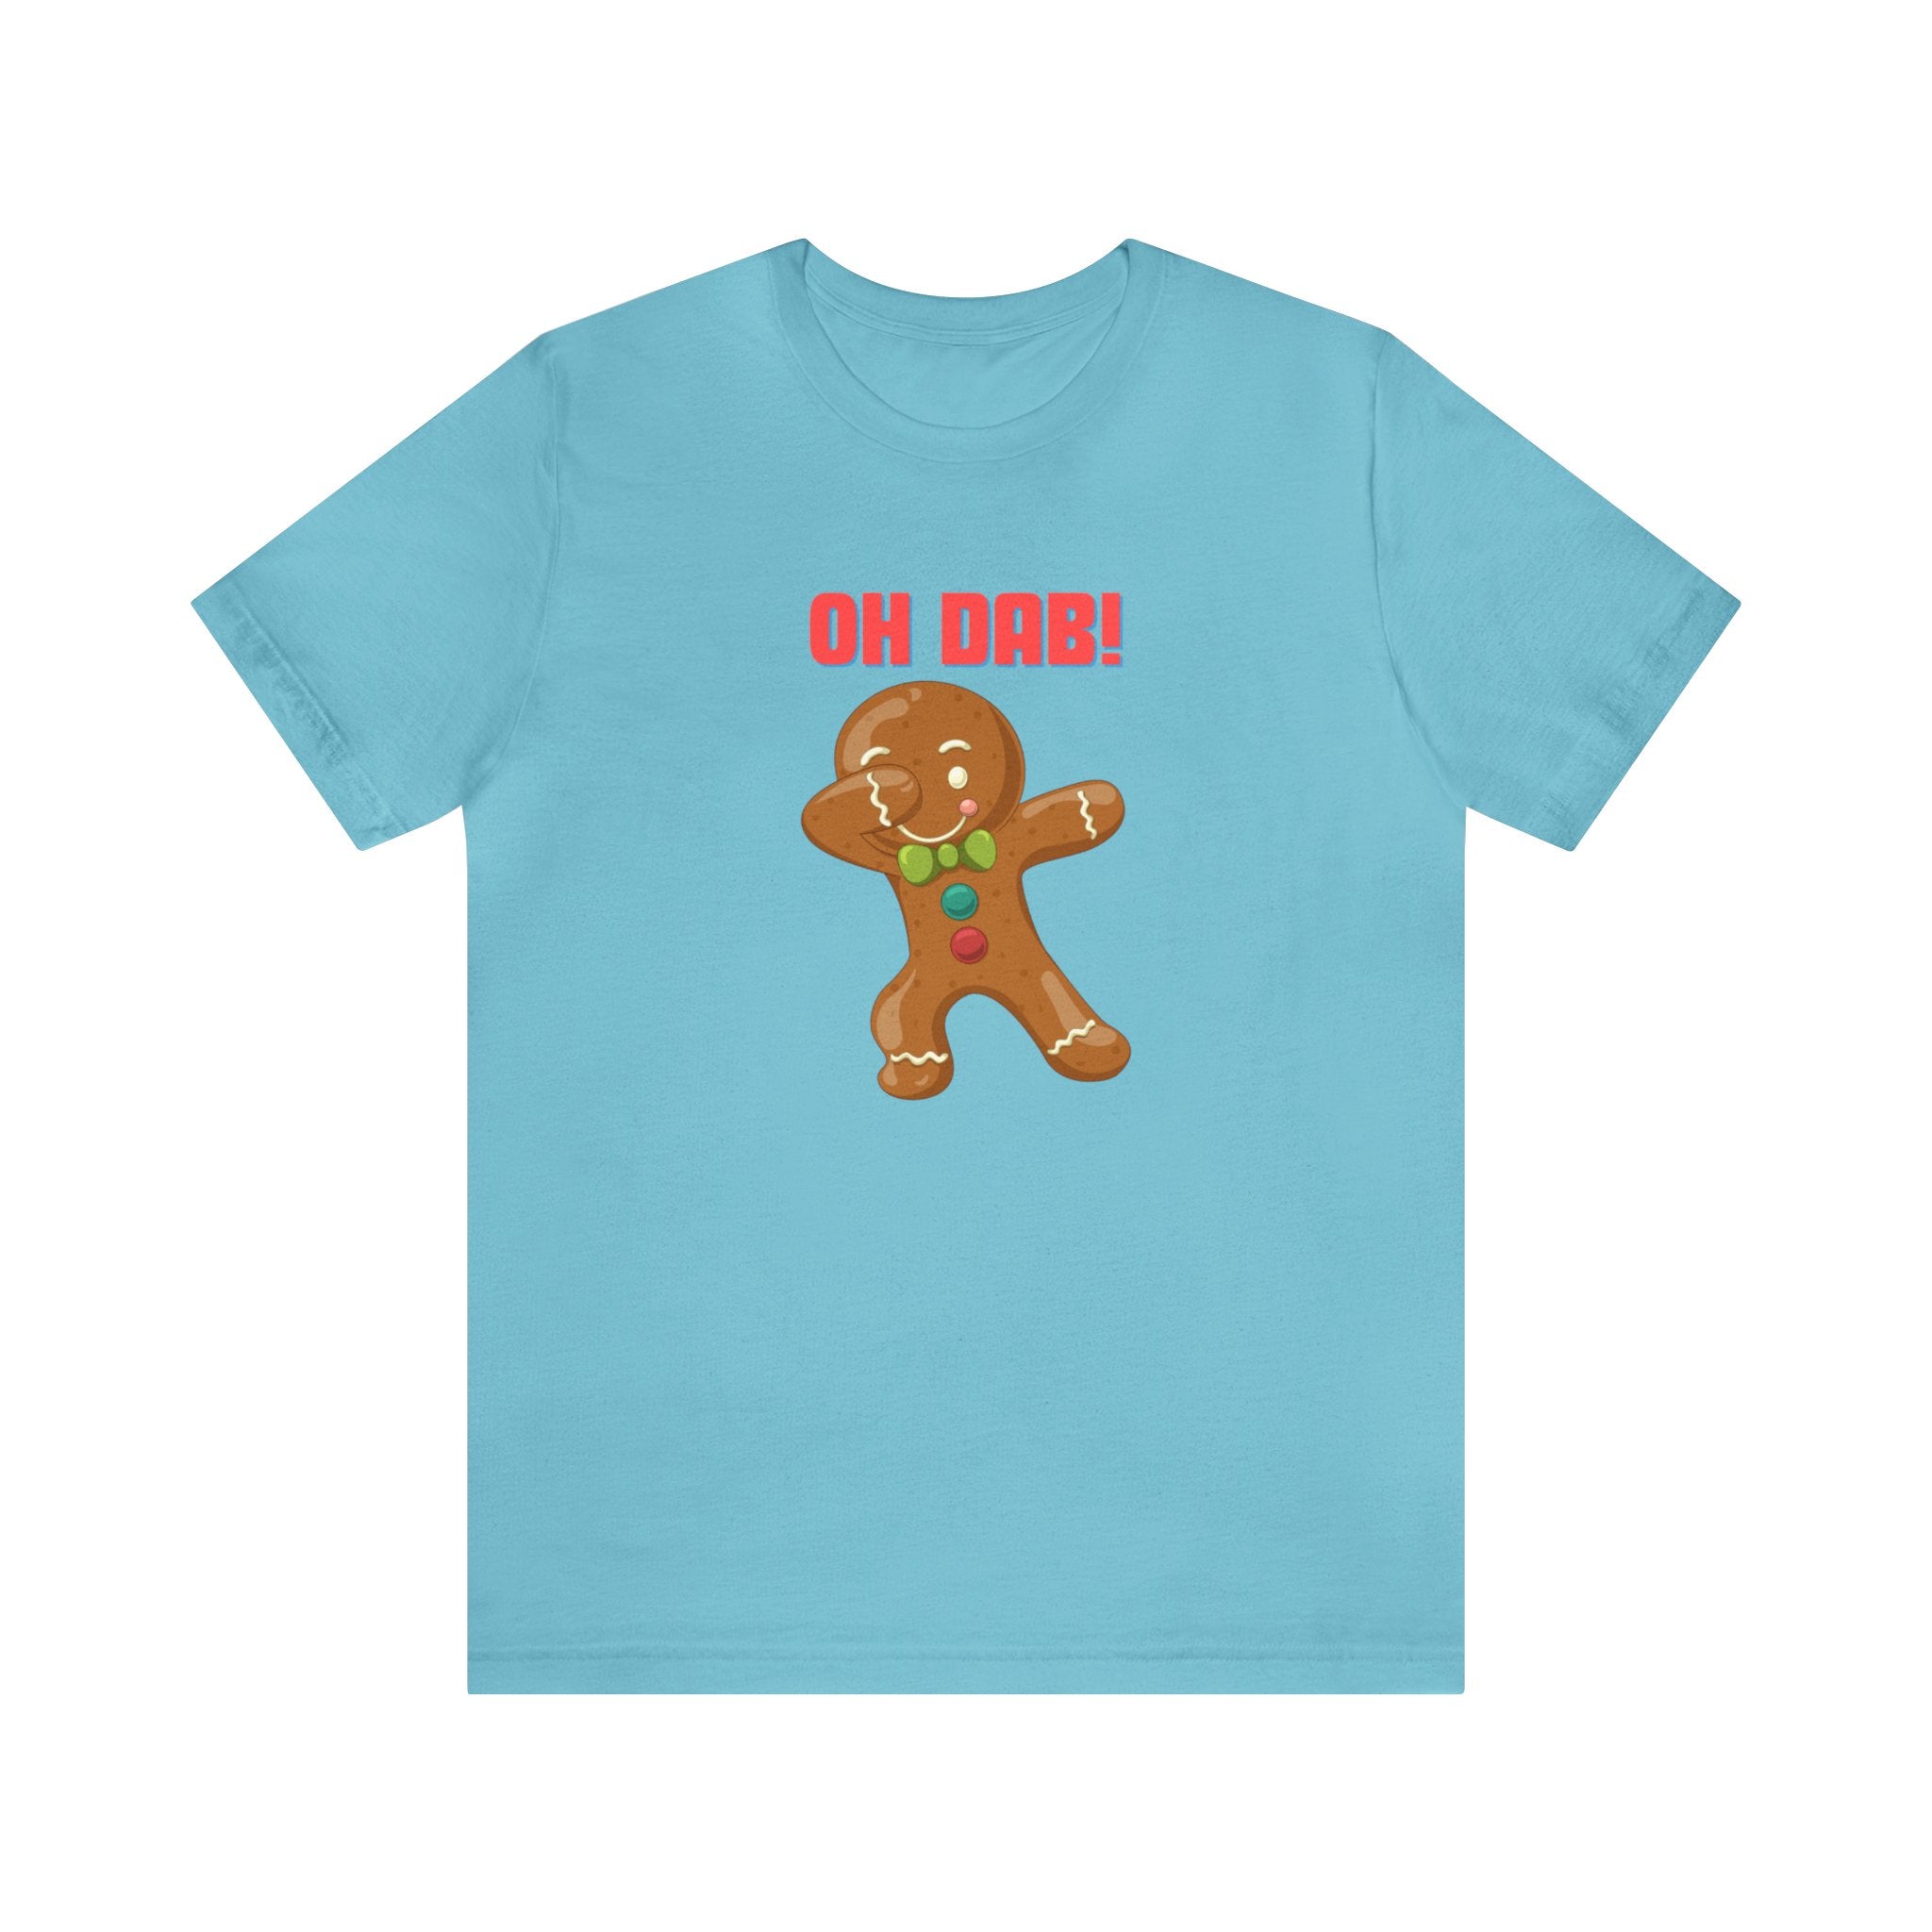 Oh Dab! Gingerbreadman : Unisex 100% Comfy Cotton, T-Shirt by Bella+Canvas